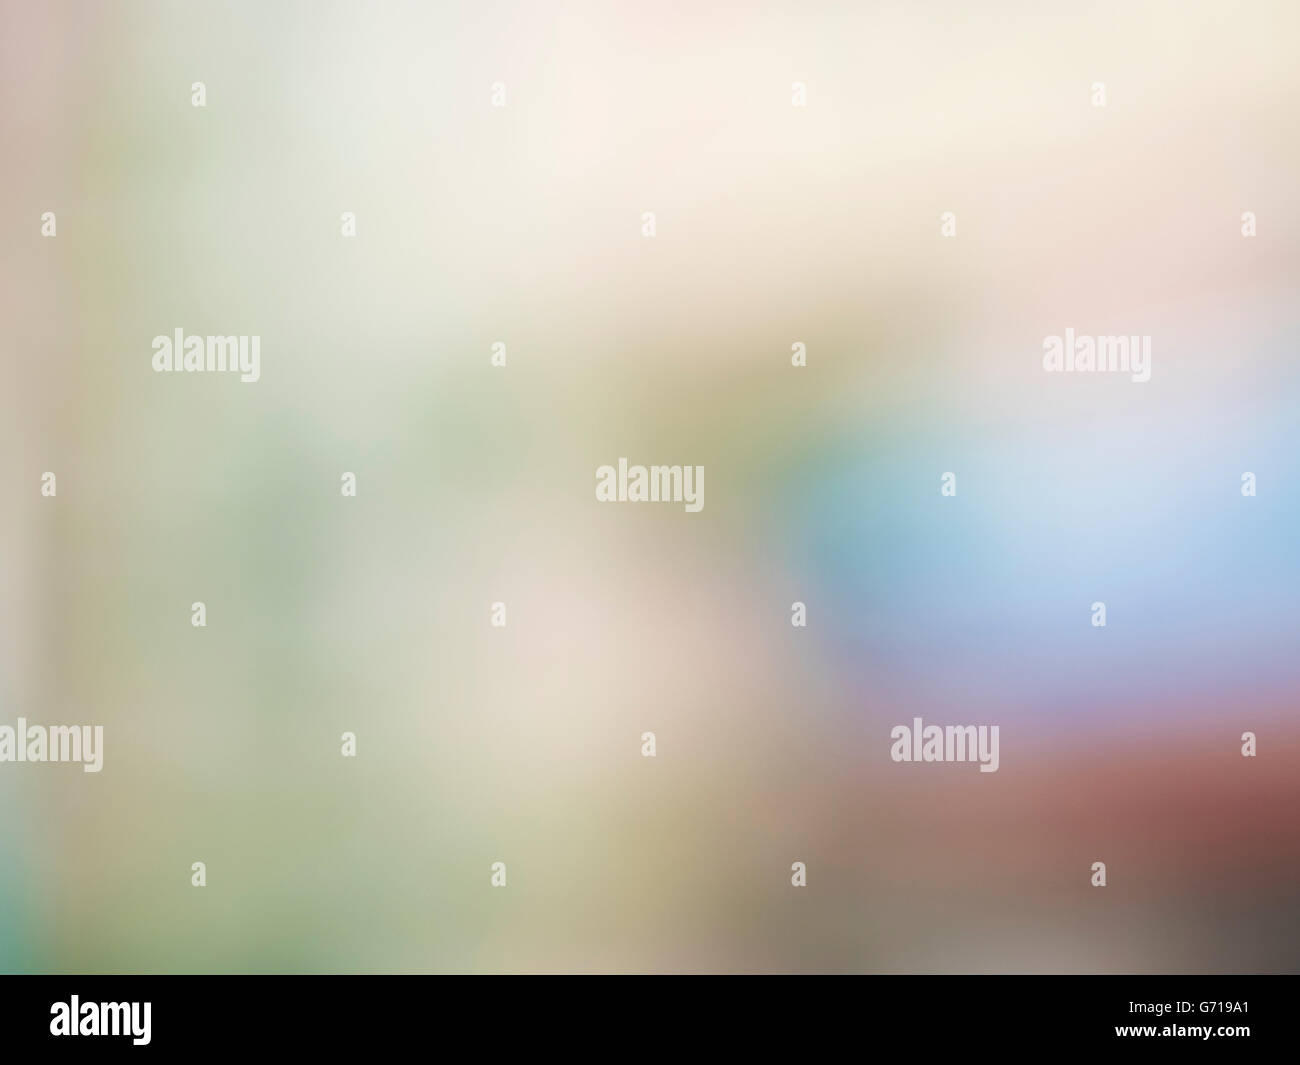 Awesome abstract blur background for webdesign, colorful background, blurred, wallpaper Stock Photo